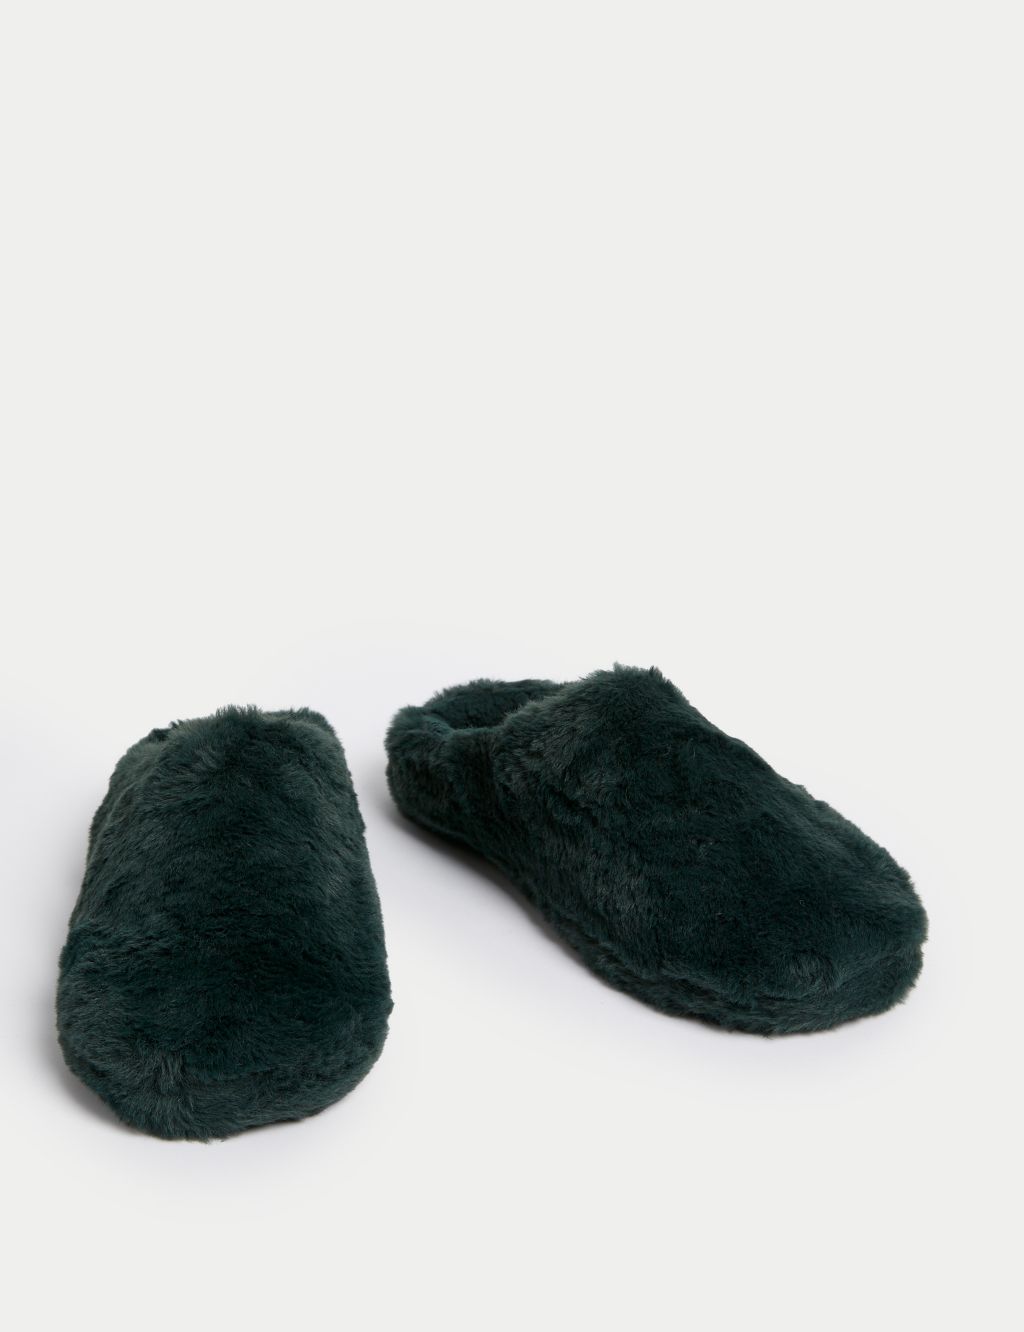 Kids' Faux Fur Slippers (13 Small - 7 large) image 2